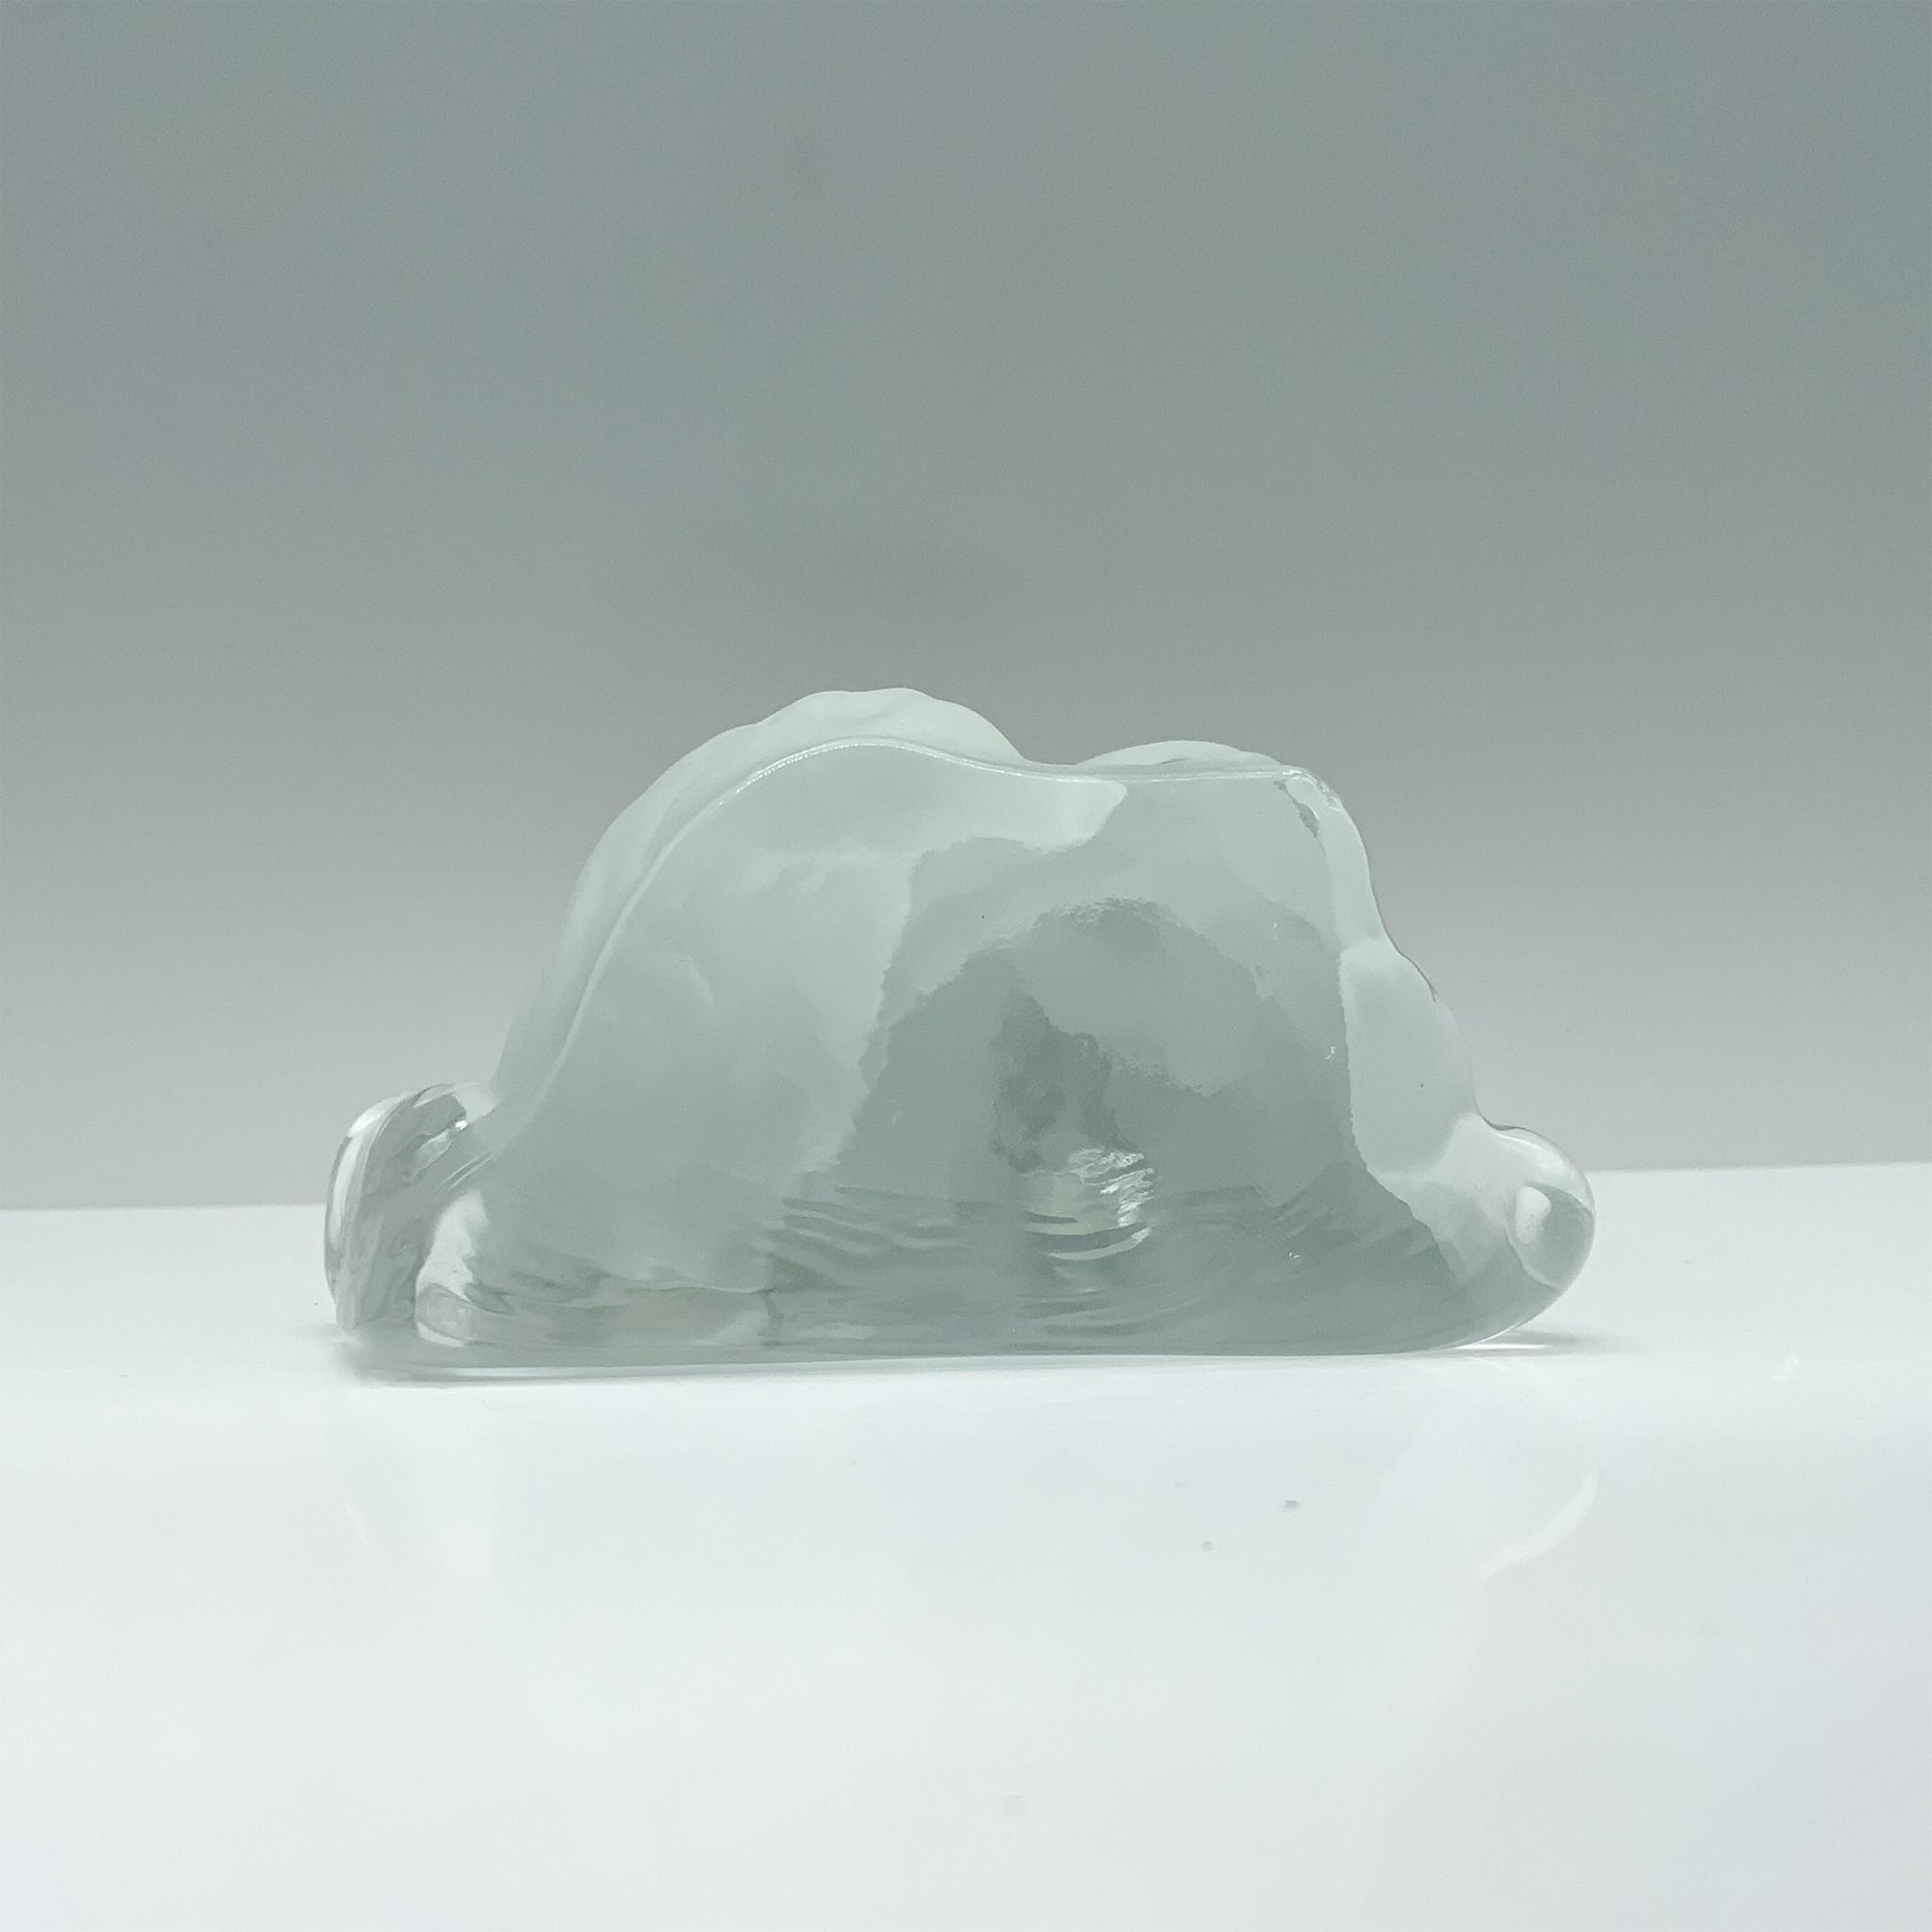 Frosted Glass Kitten Figurine - Image 3 of 3